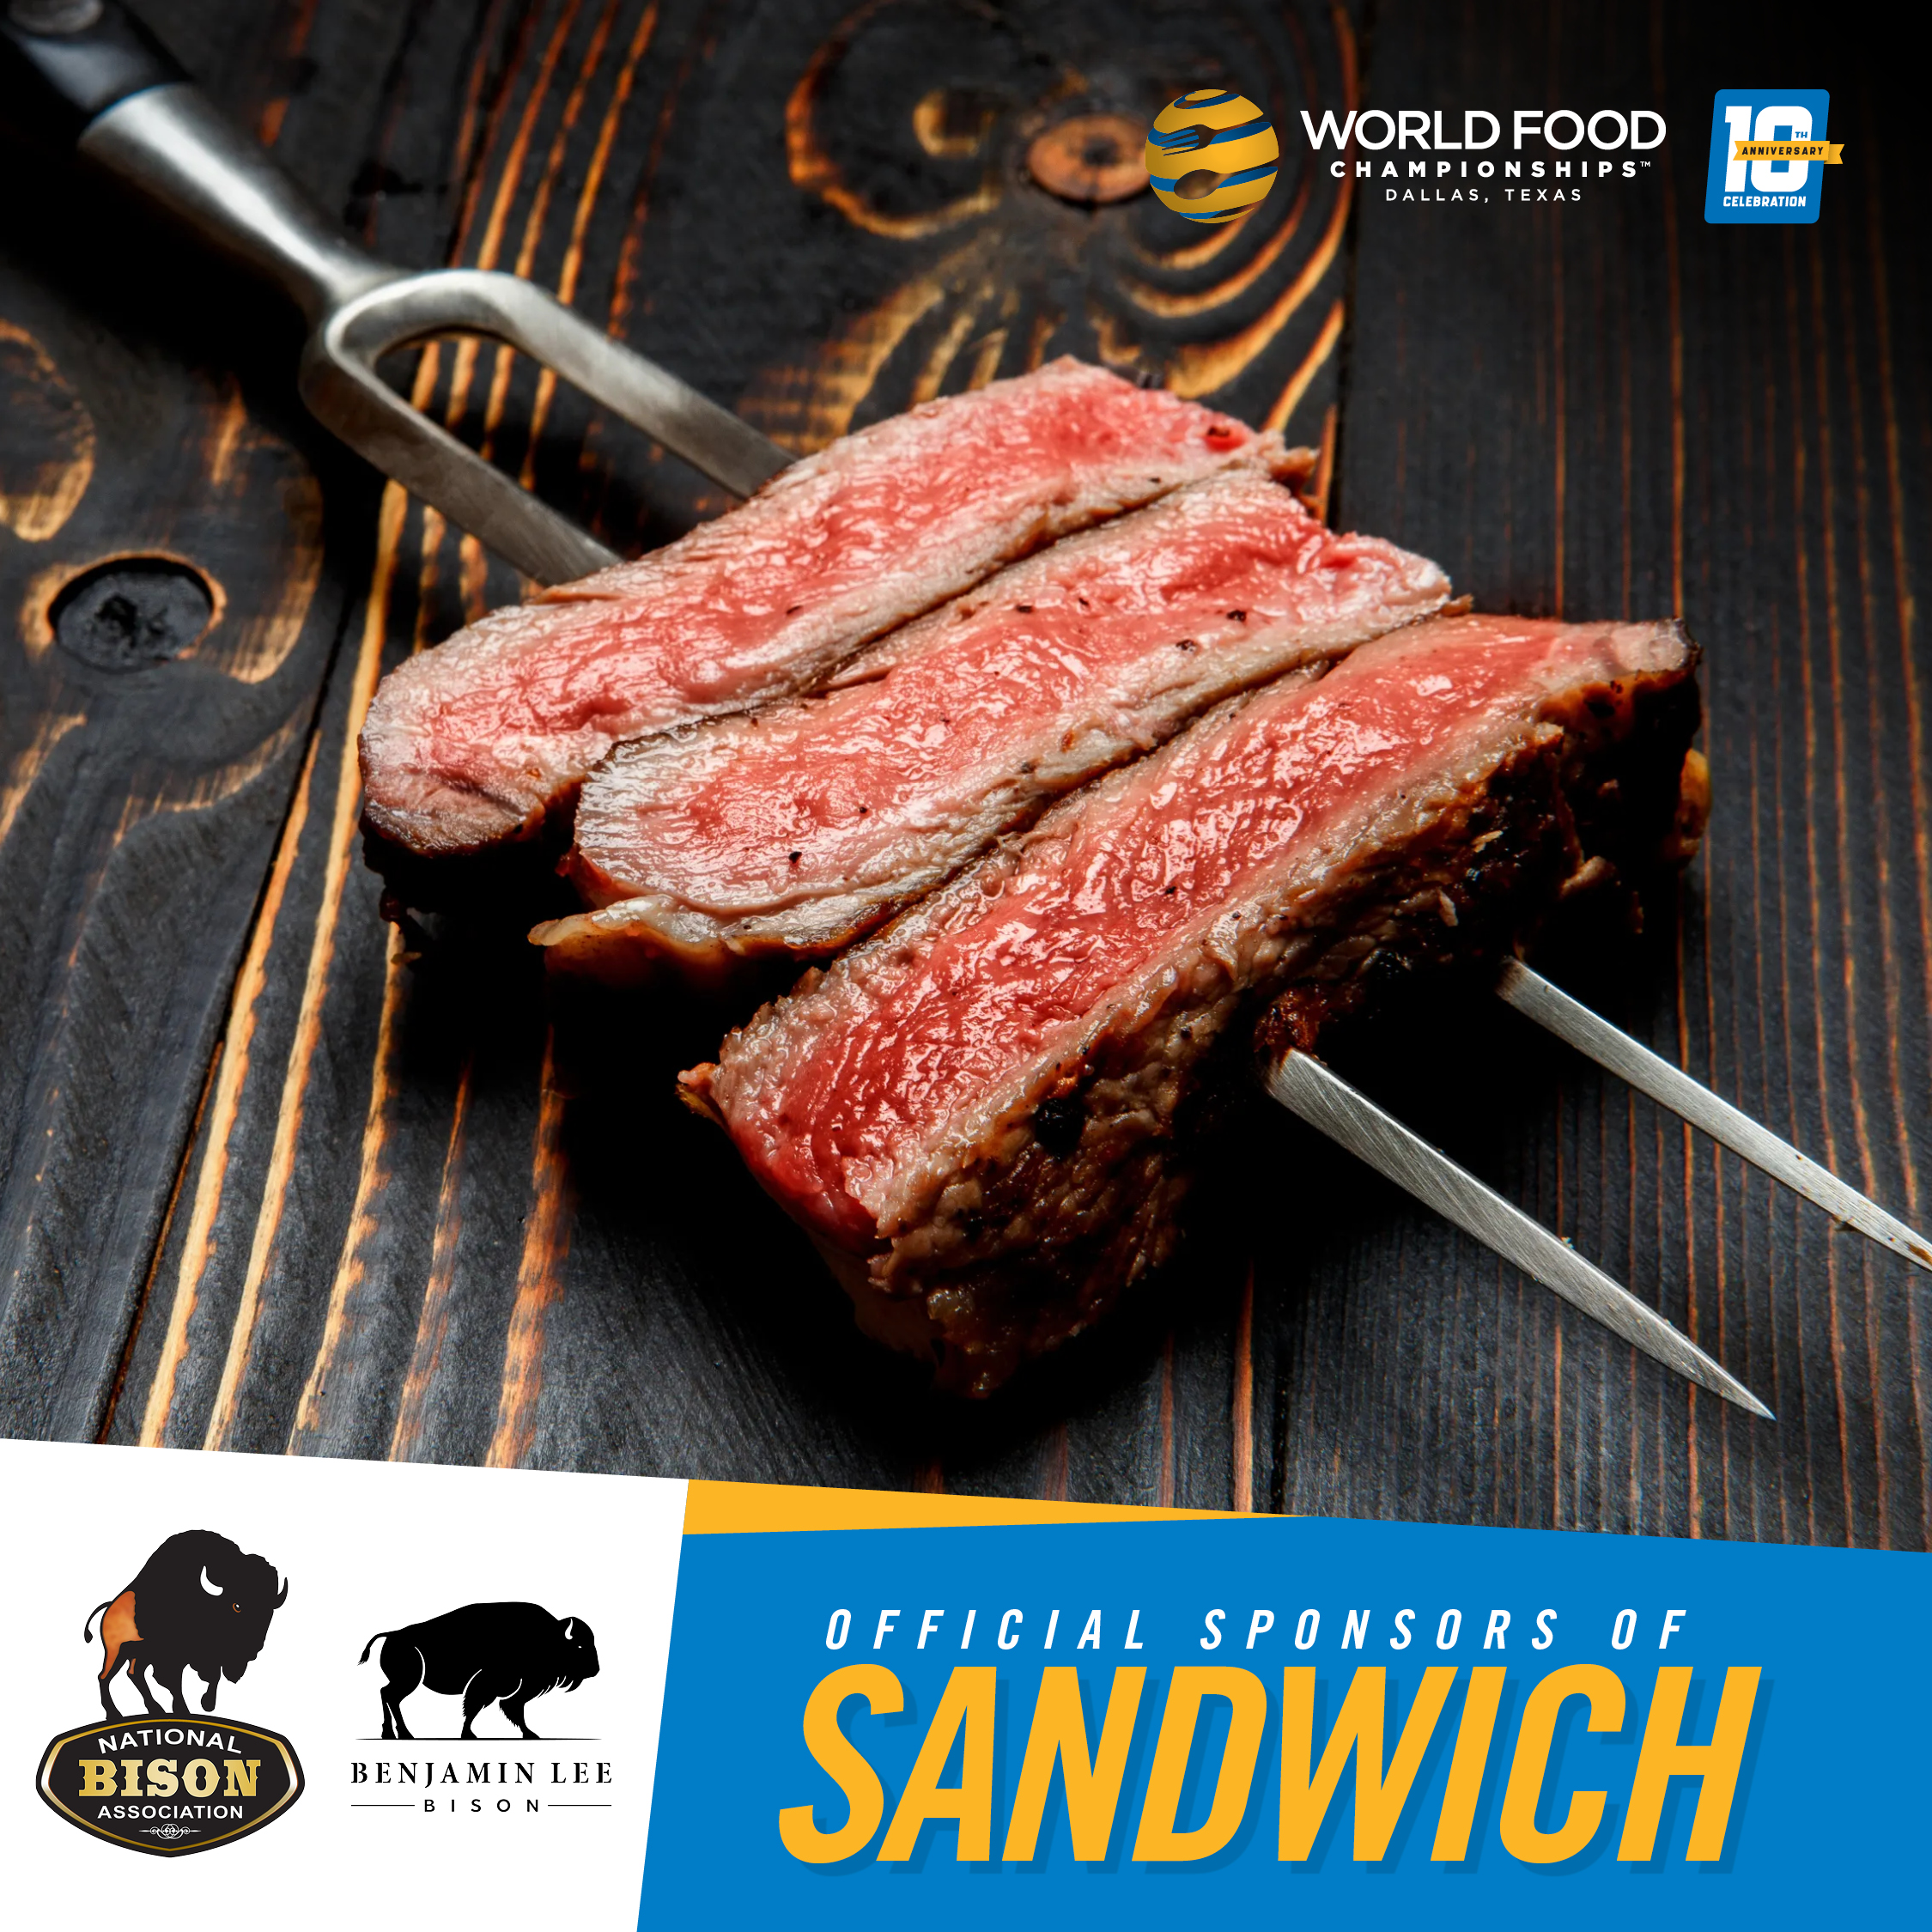 Stampede of Flavor Expected in WFC Sandwich Championship